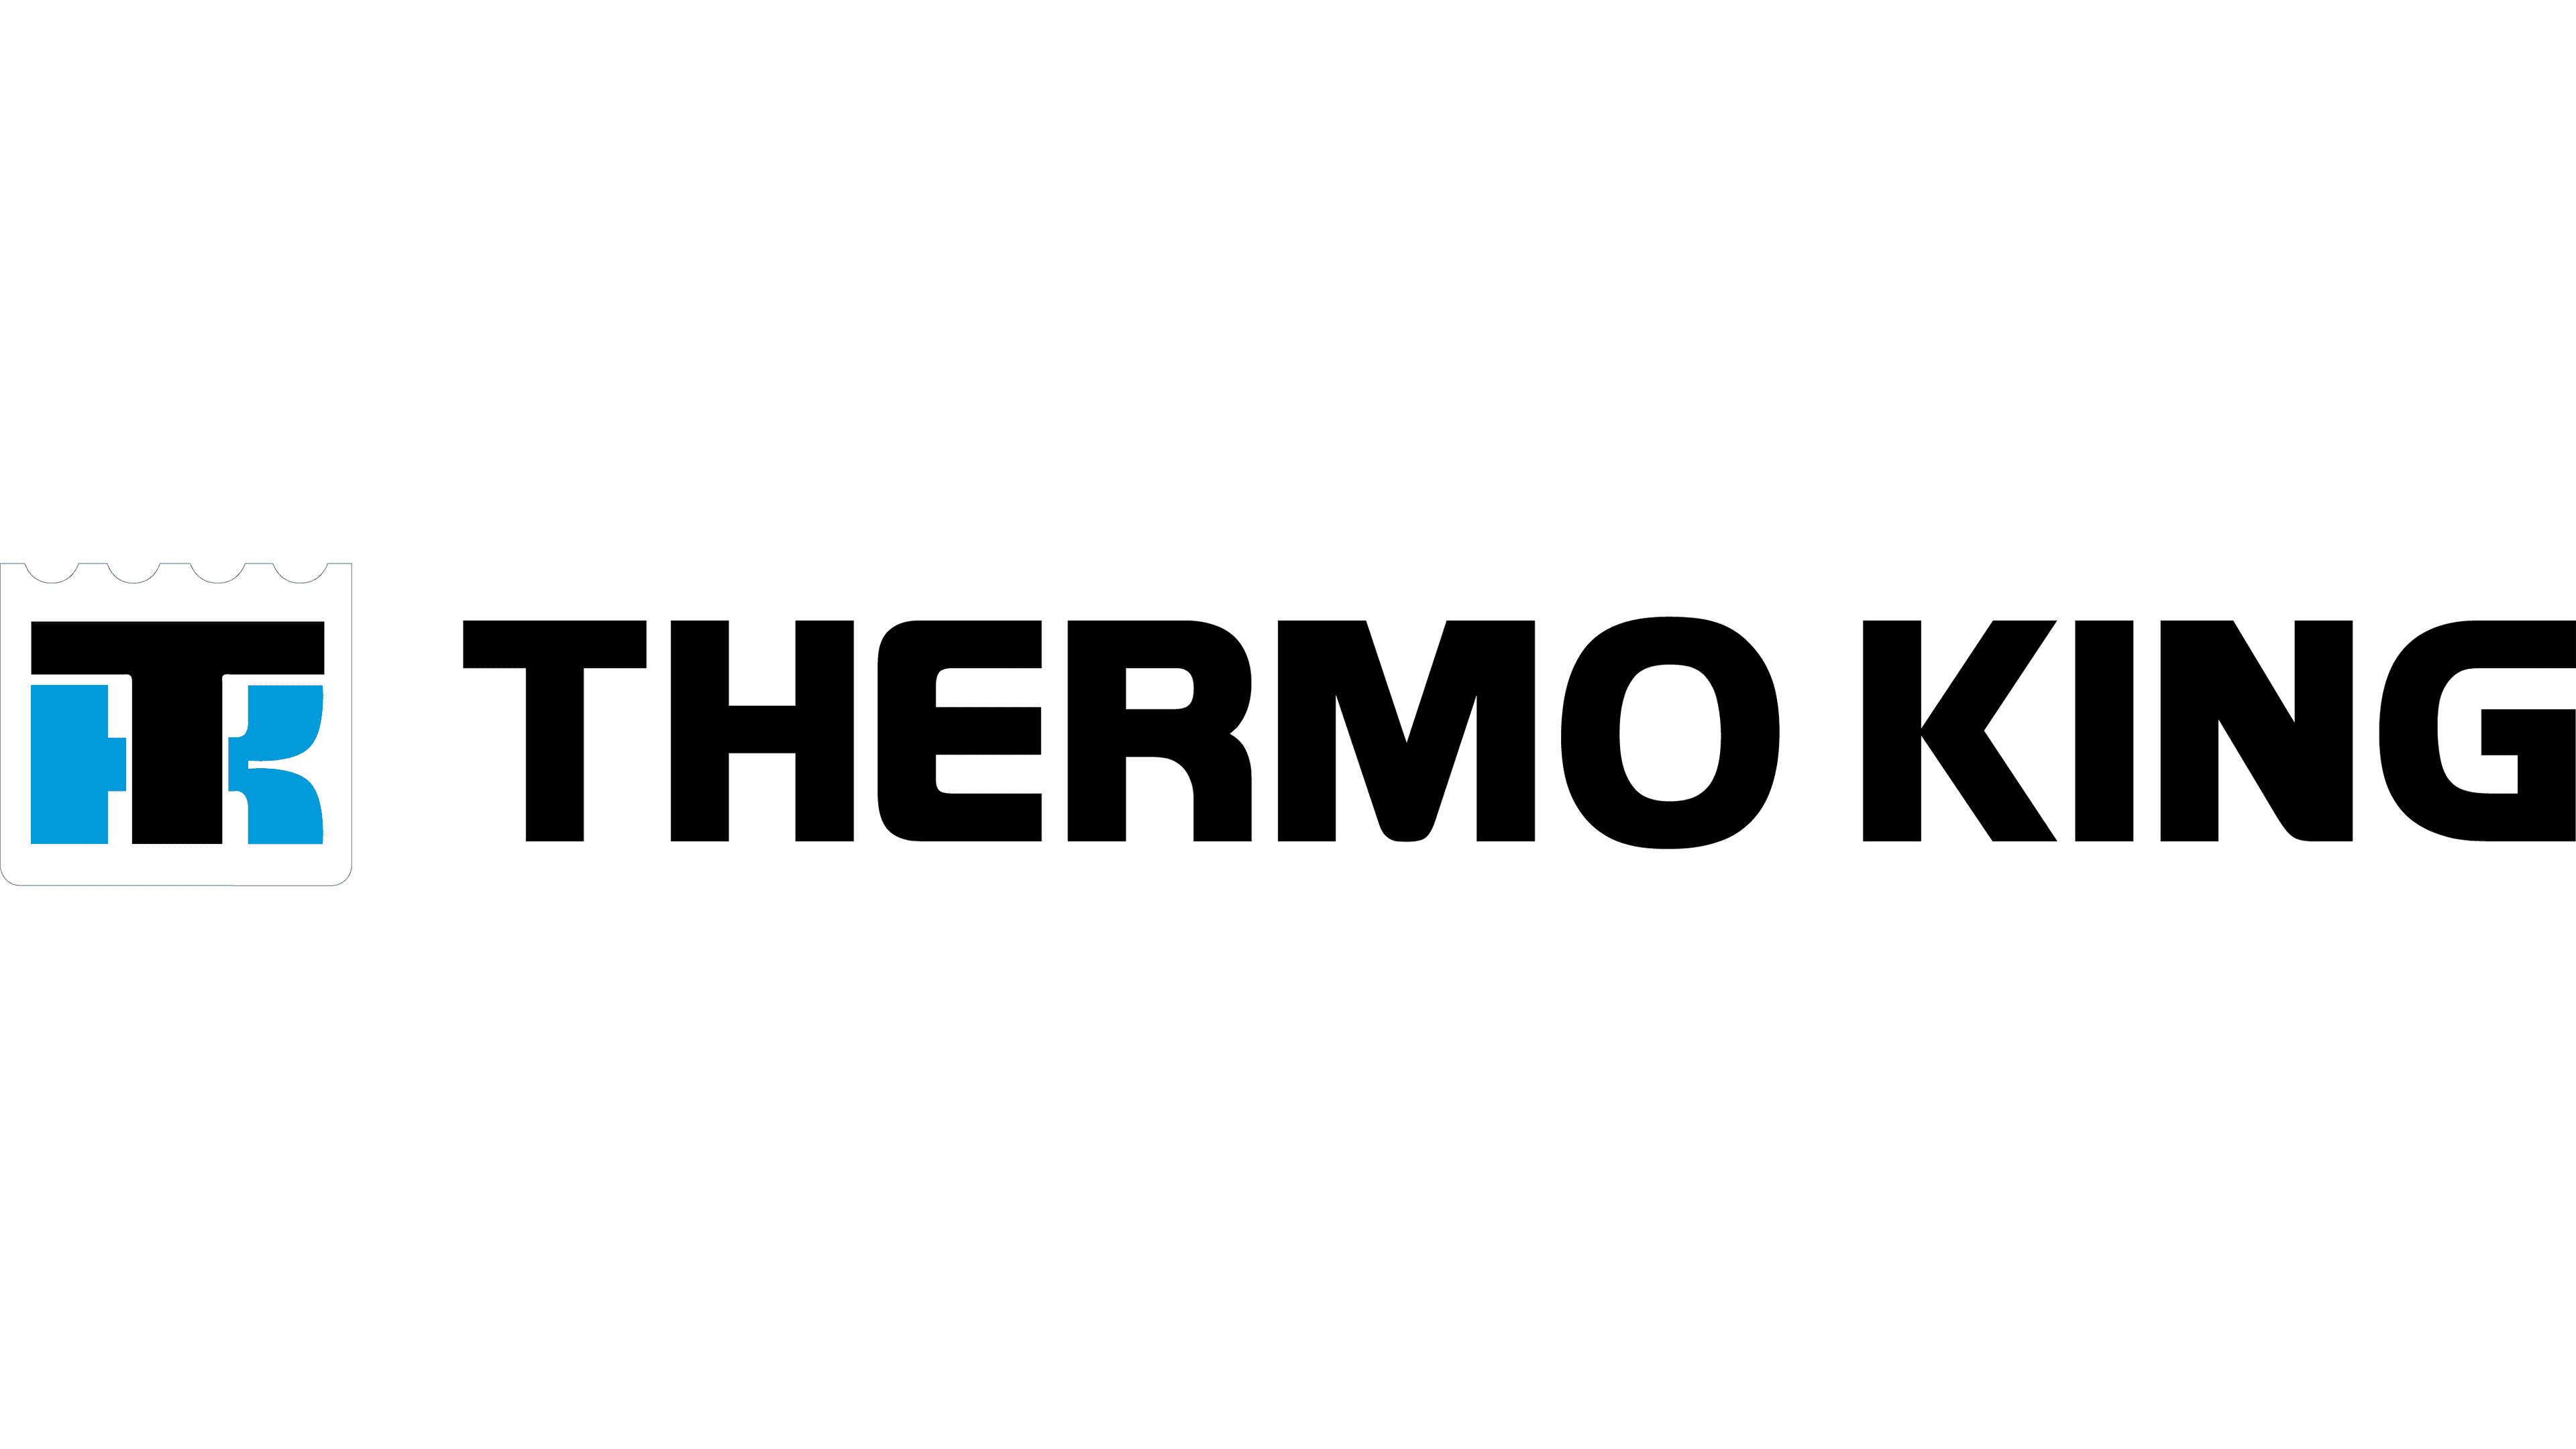 https://1000logos.net/wp-content/uploads/2022/12/Thermo-King-logo.png